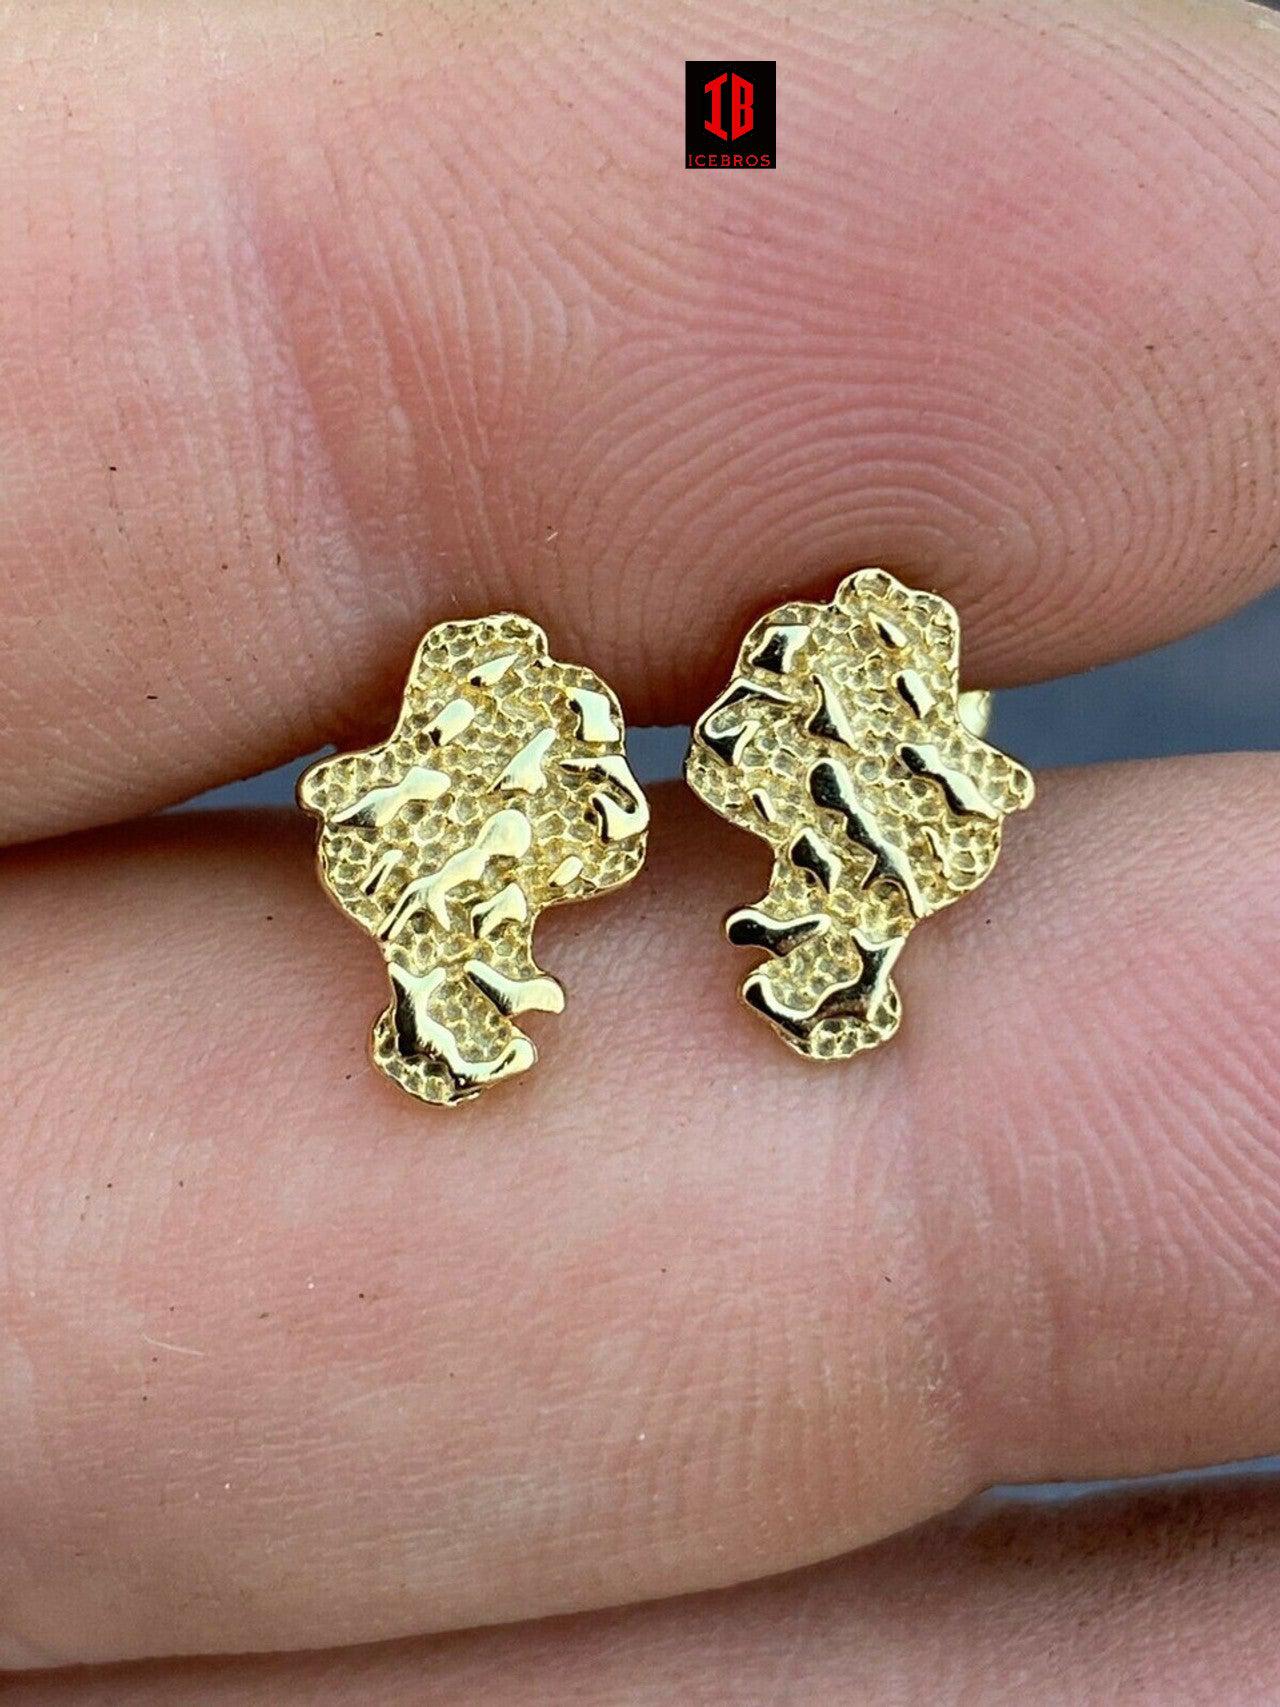 Real Solid 925 Sterling Silver 14k Finish Men Ladies Gold Nugget Earrings Studs